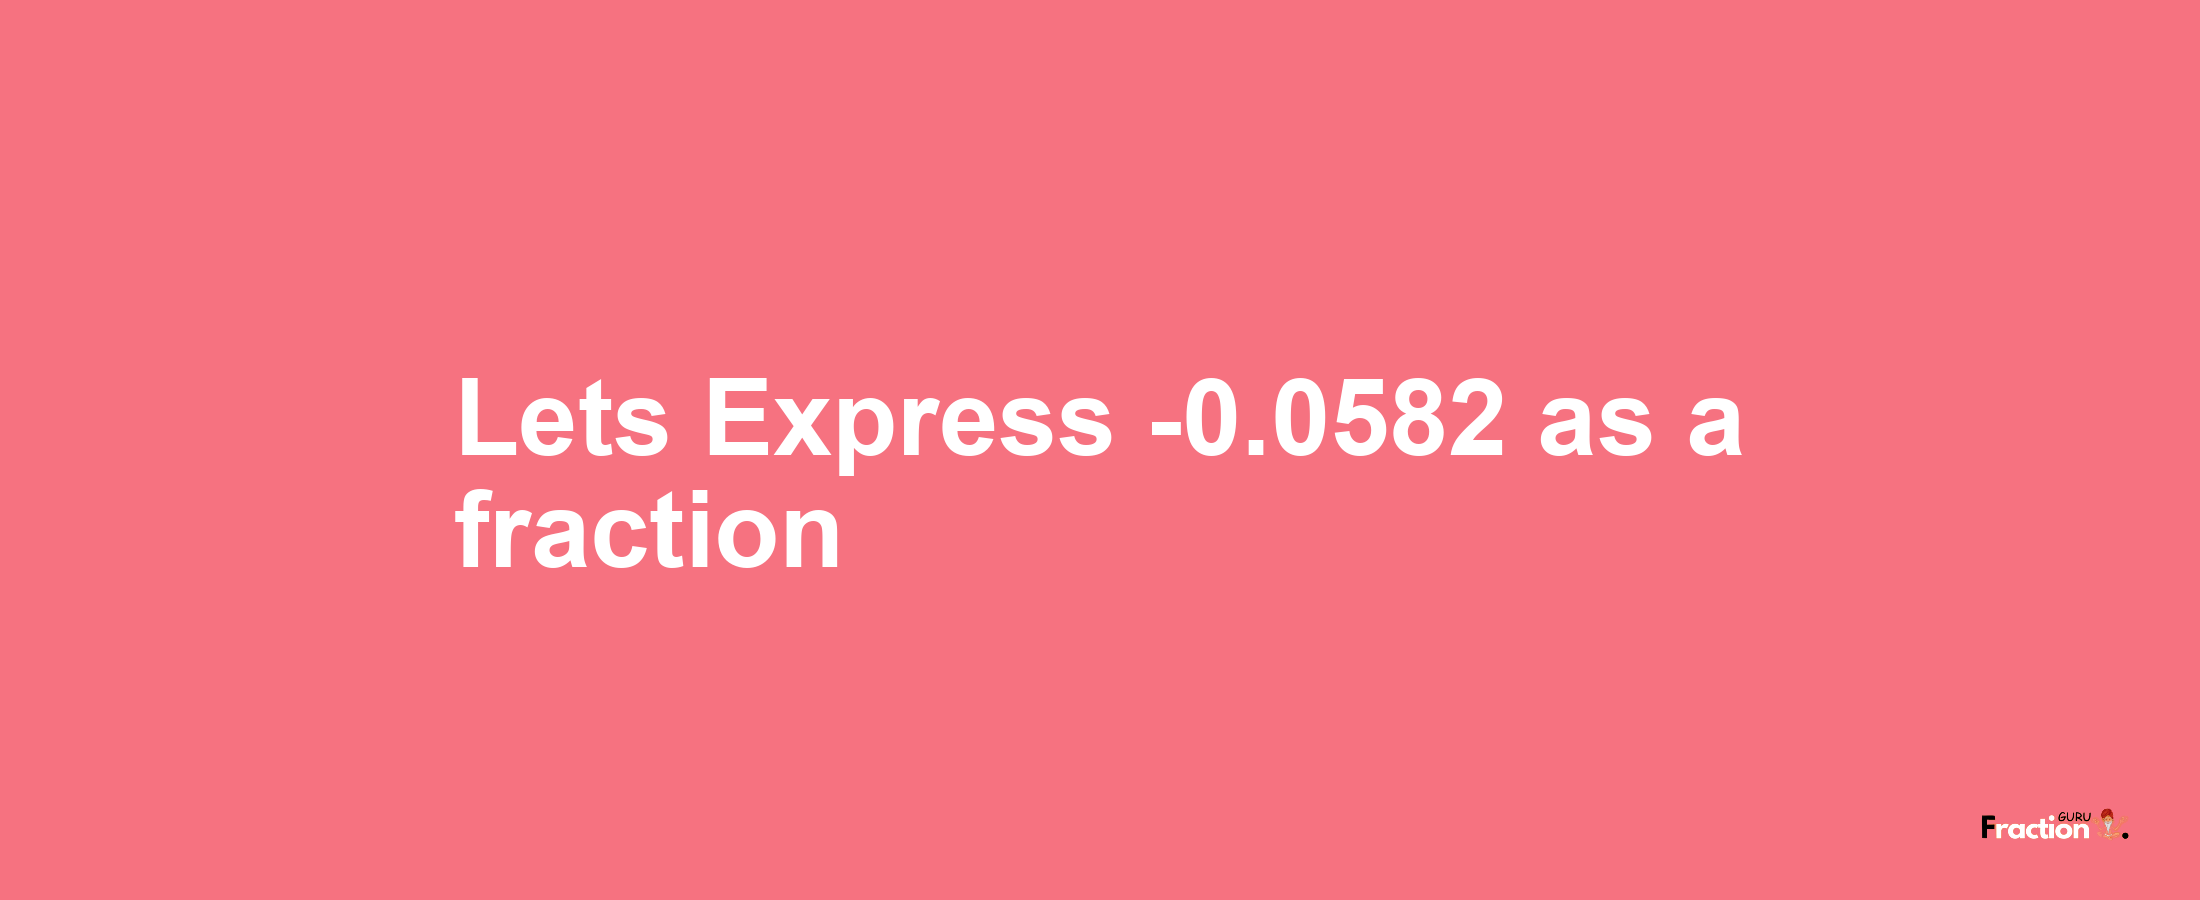 Lets Express -0.0582 as afraction